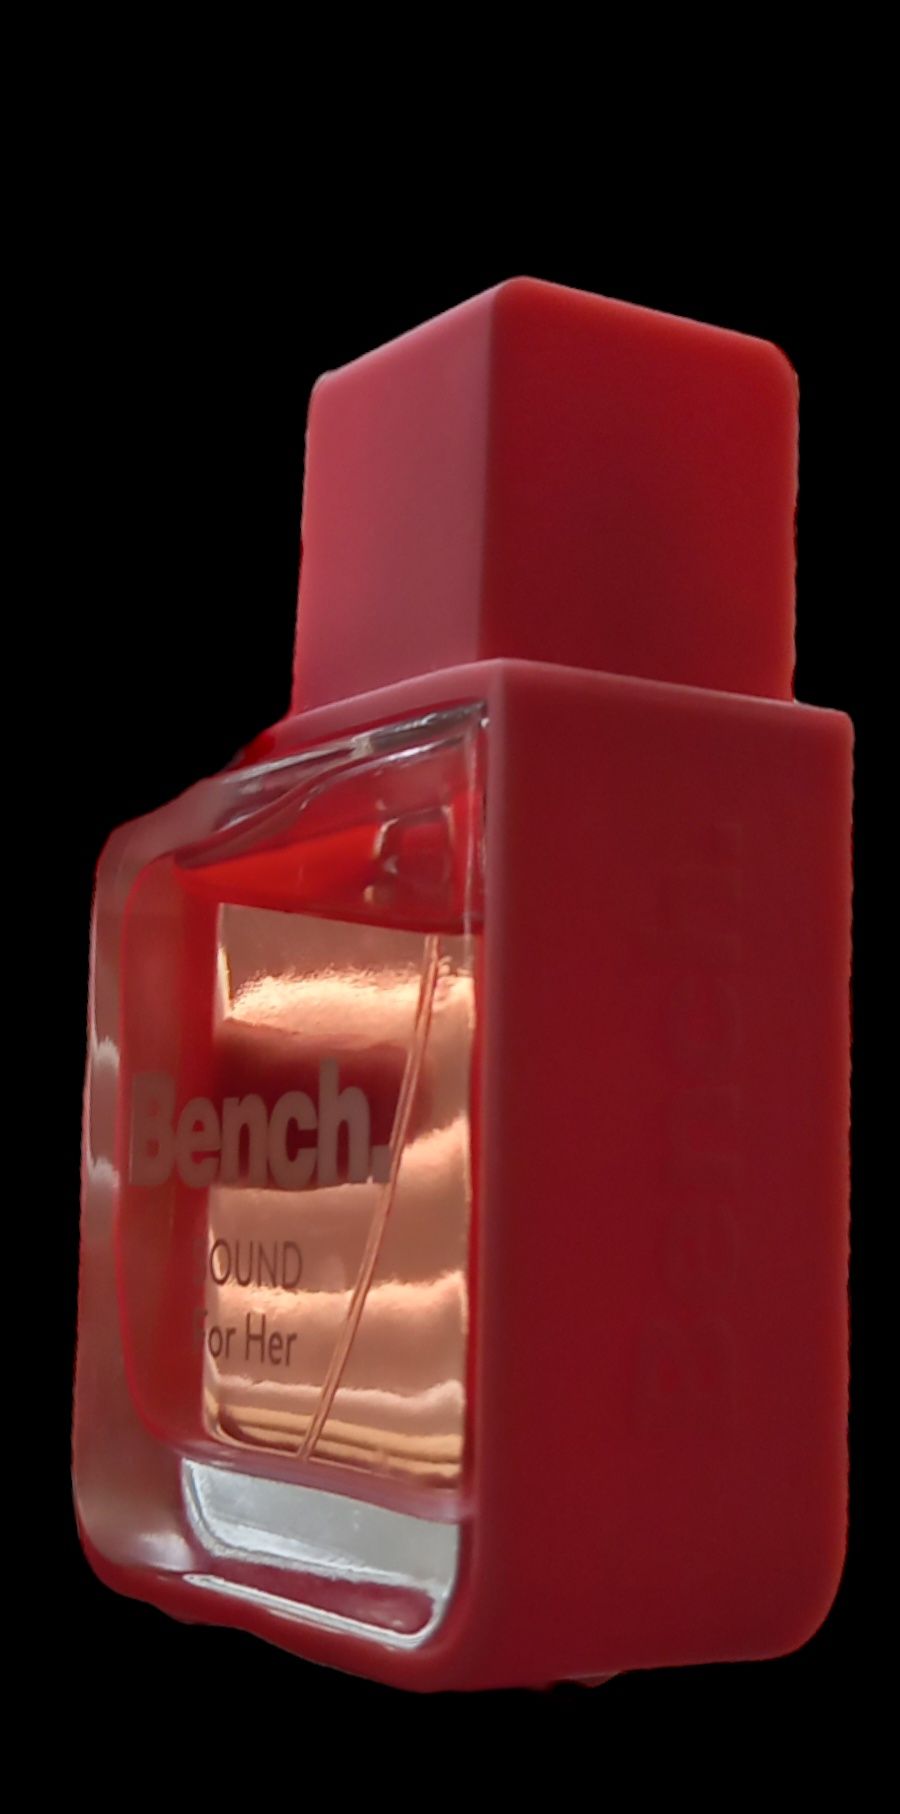 Bench. Sound for Her тоалетна вода 50 ml